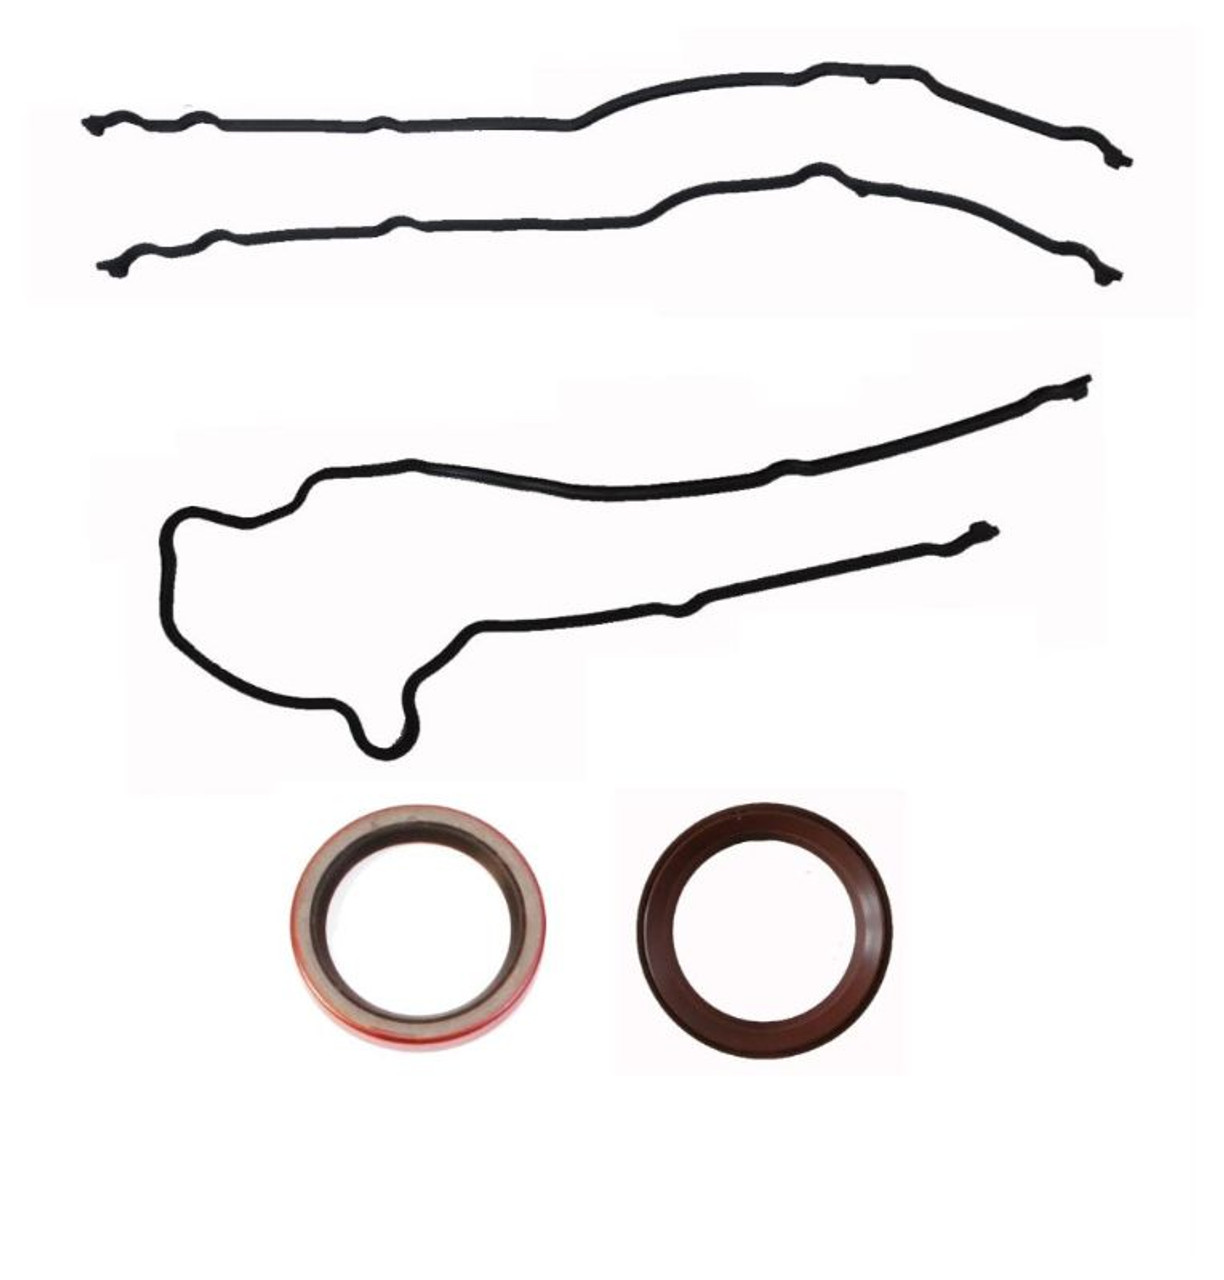 2002 Ford F-550 Super Duty 6.8L Engine Timing Cover Gasket Set TCF330-A -145